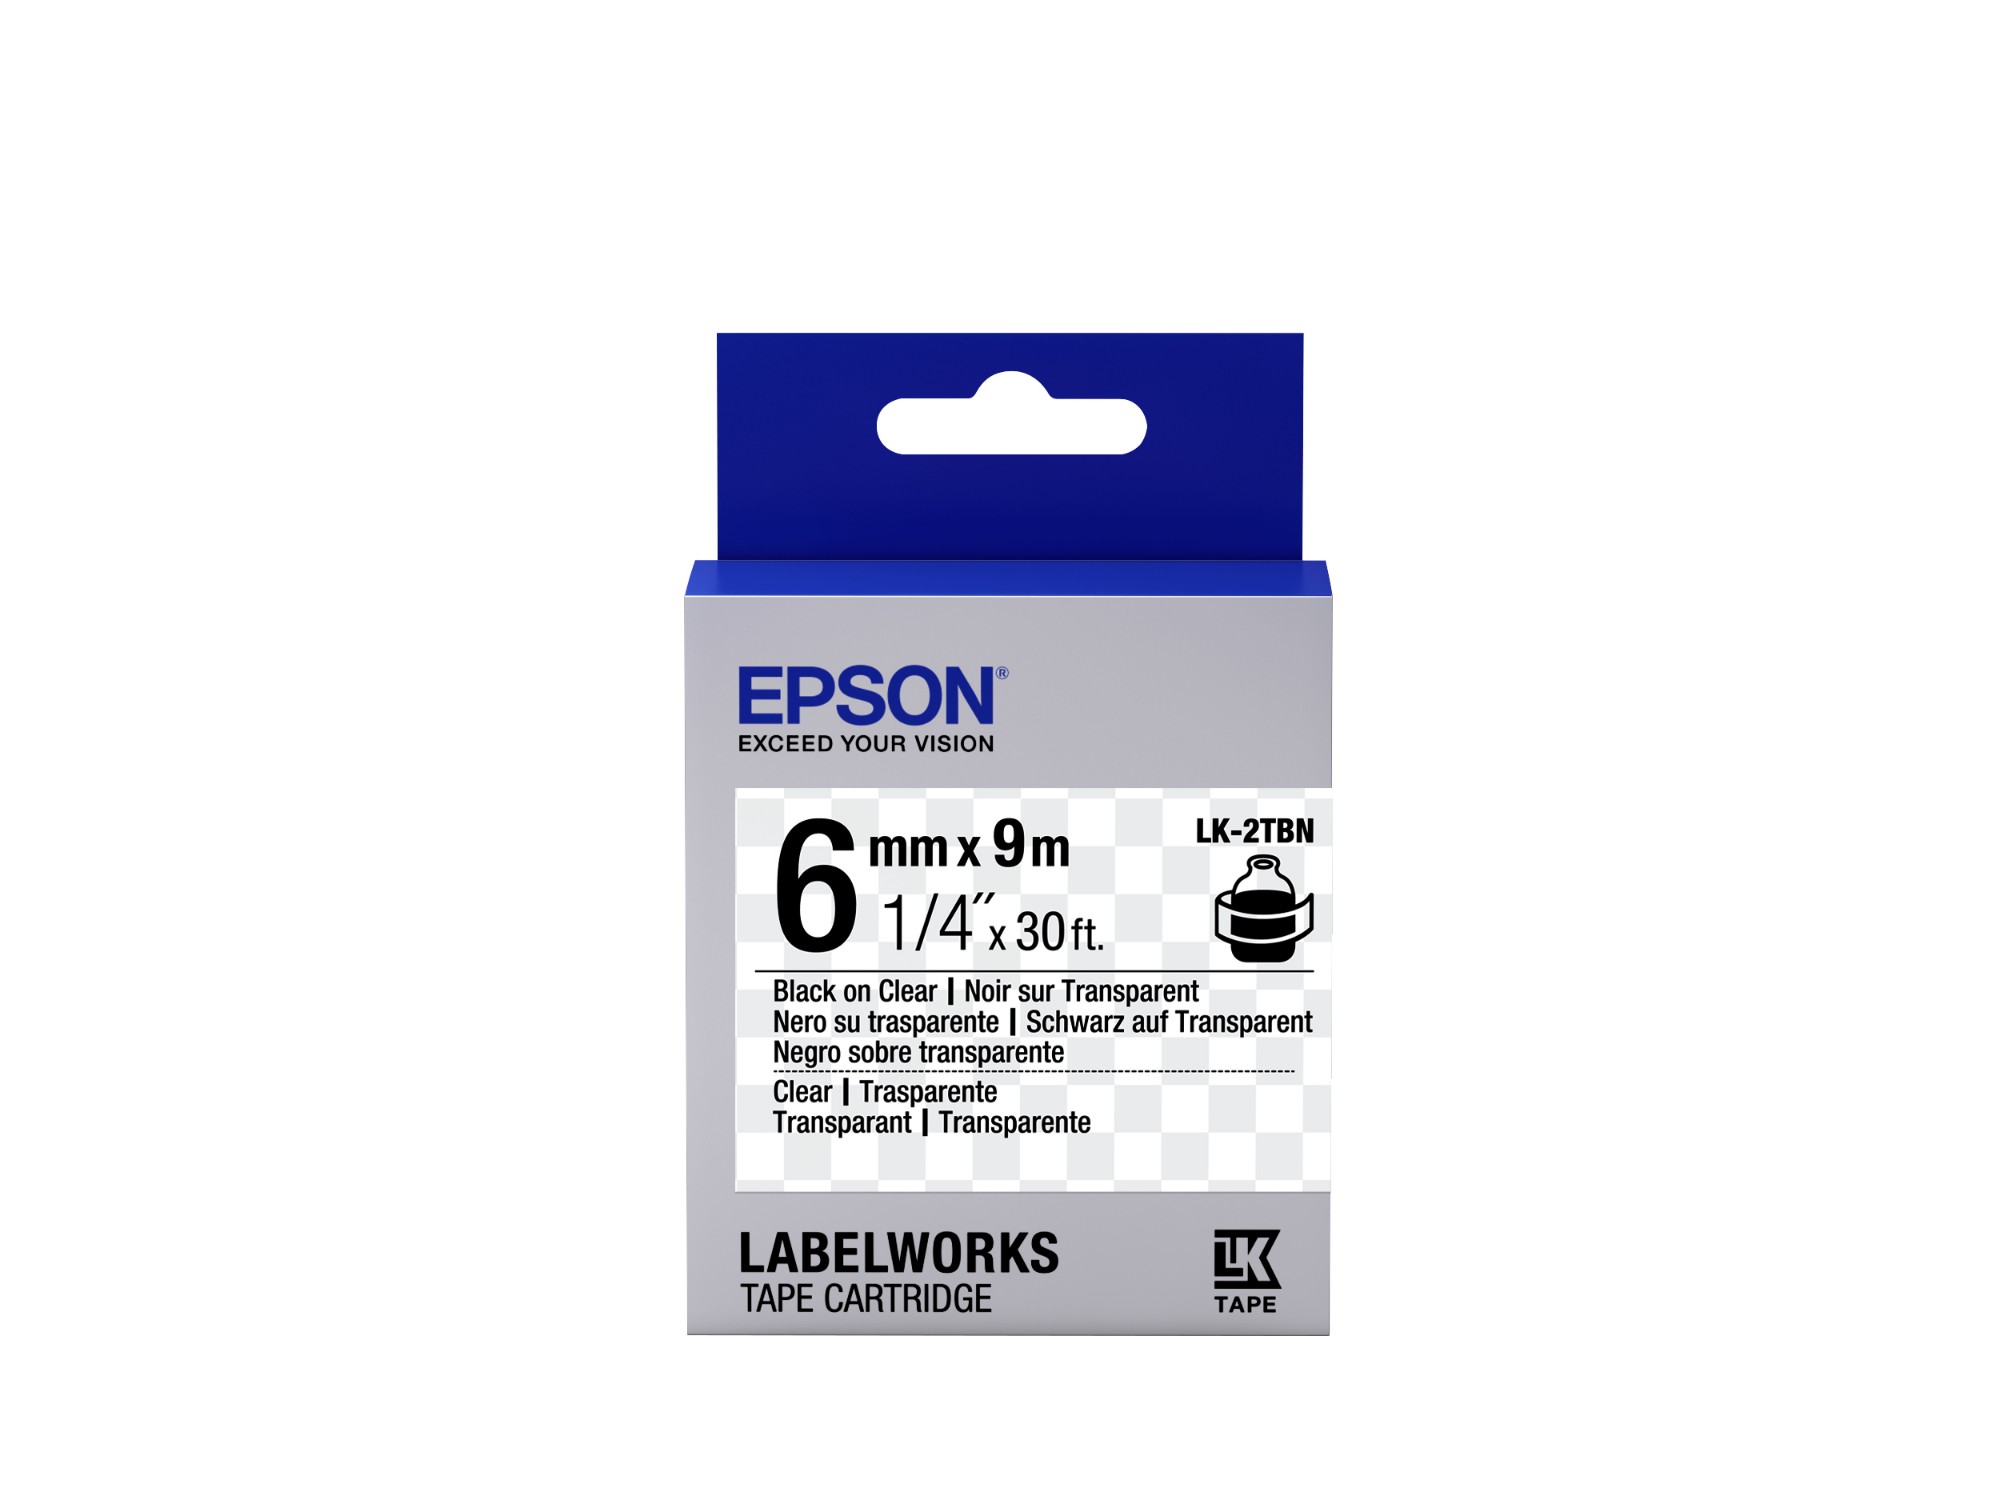 Epson C53S652004/LK-2TBN Ribbon black on Transparent extra adhesive 6mm x 9m for Epson LabelWorks 4-18mm/36mm/6-12mm/6-18mm/6-24mm